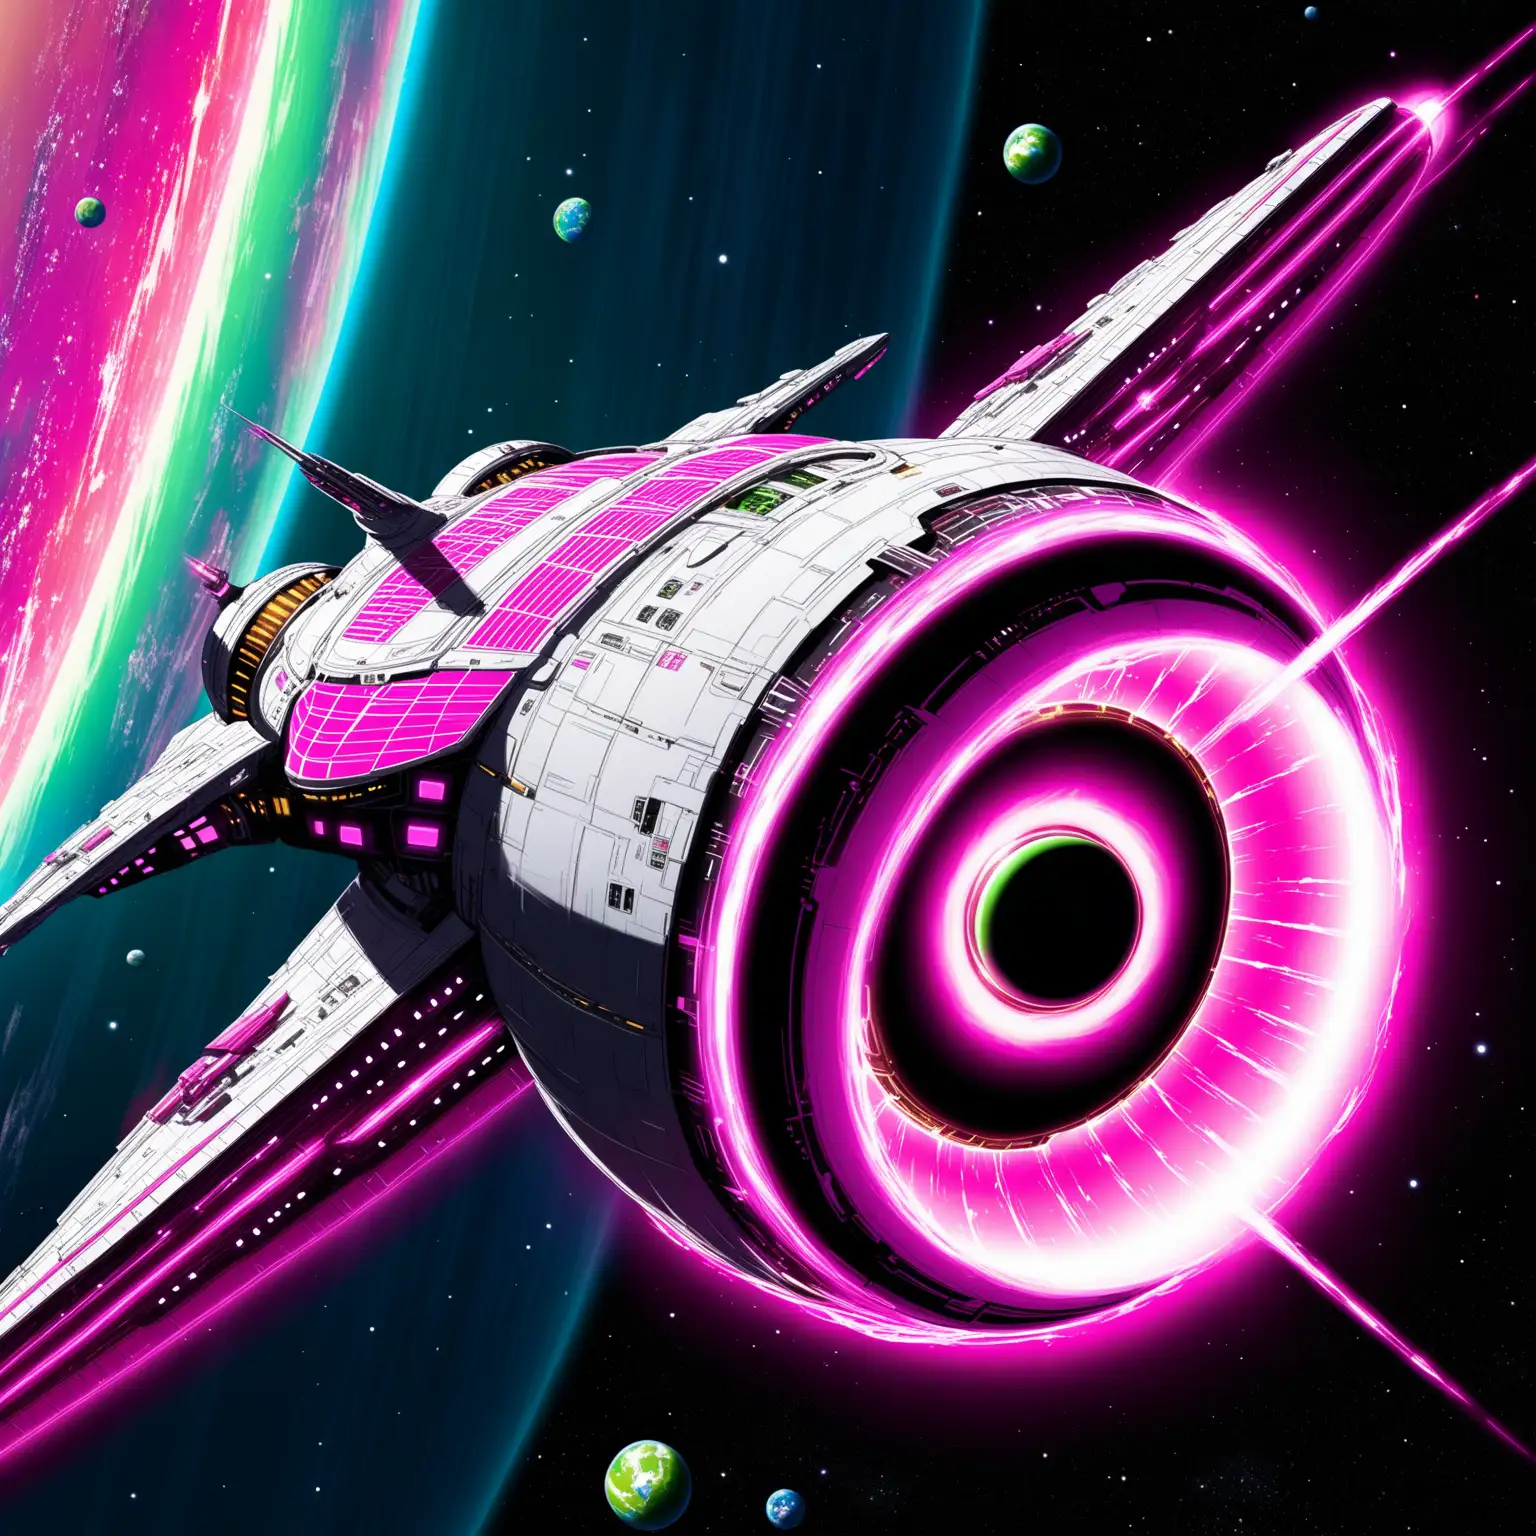 Alien Spaceship Cruiser Activating in Orbit with Pink Energy Ring and Green Planet